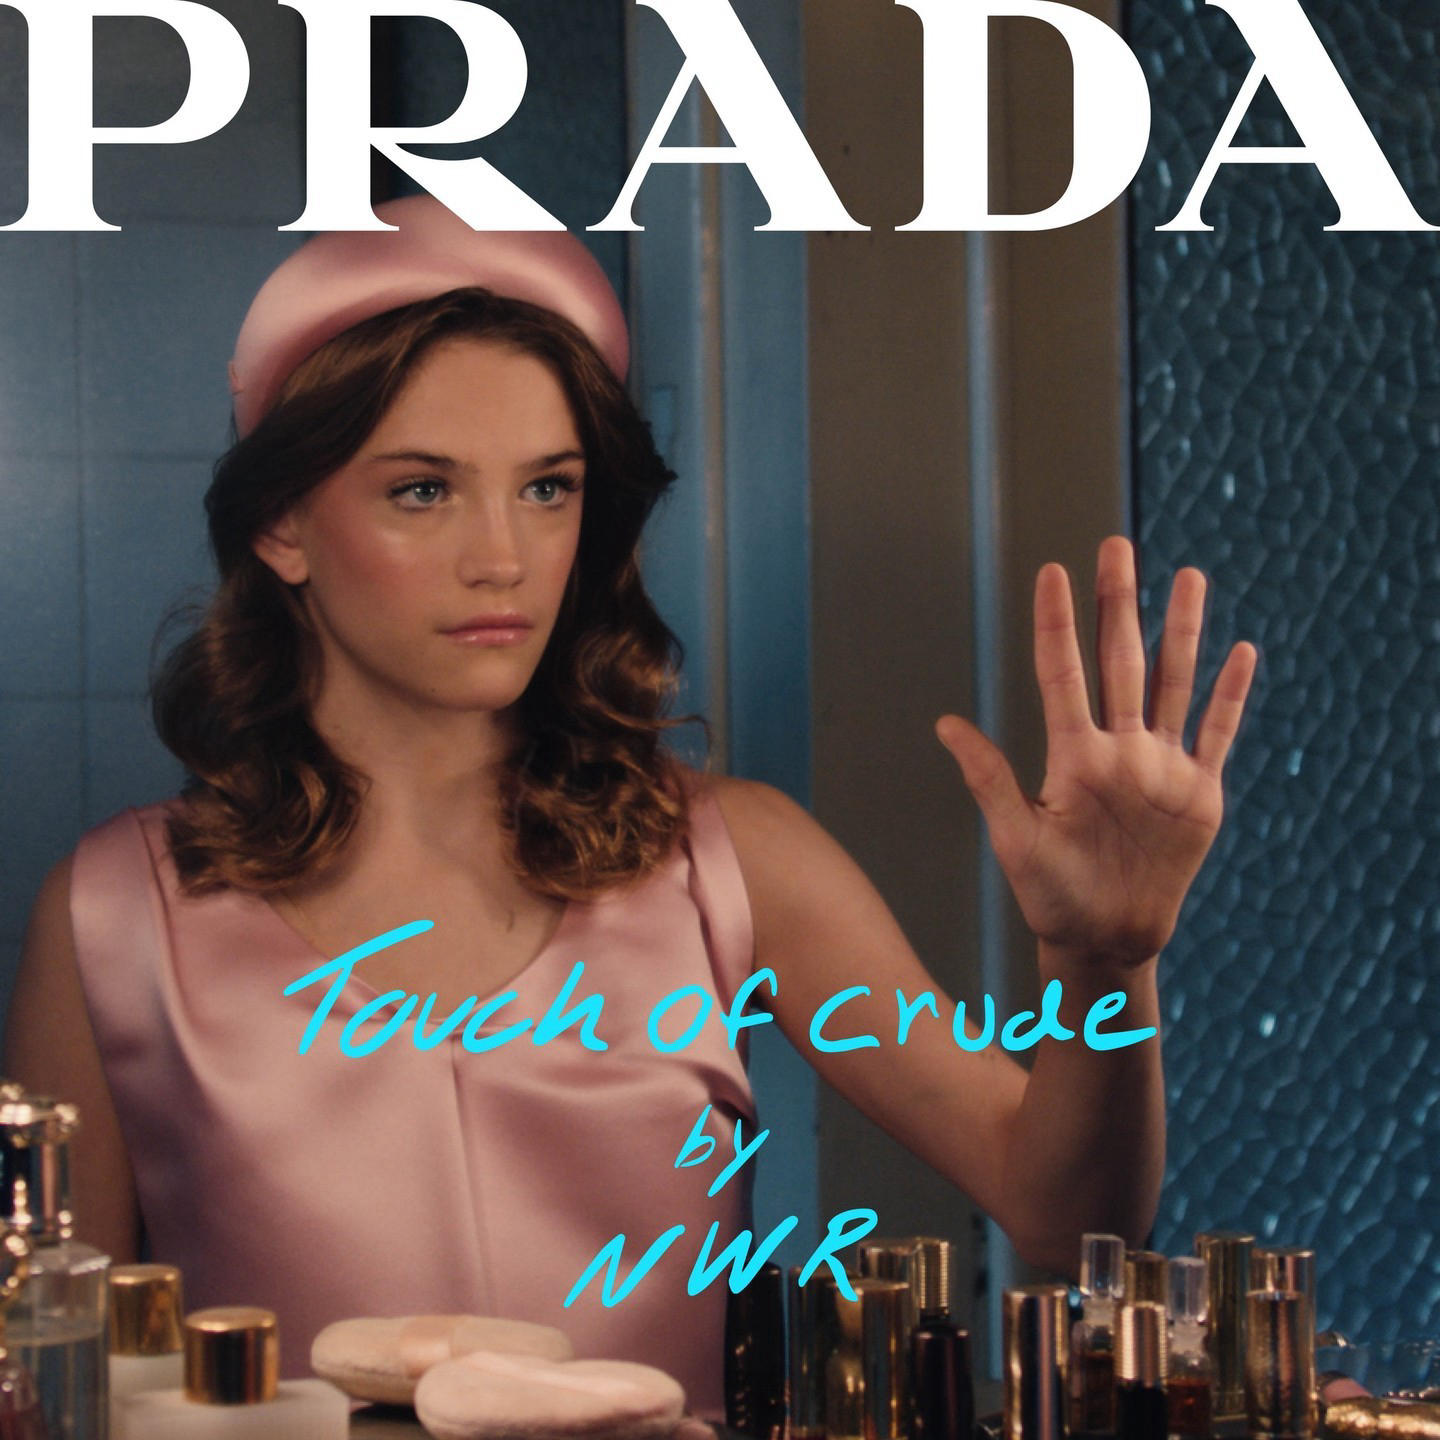 image  1 Prada - Touch of Crude, the short movie created by film director Nicolas Winding Refn for the Prada